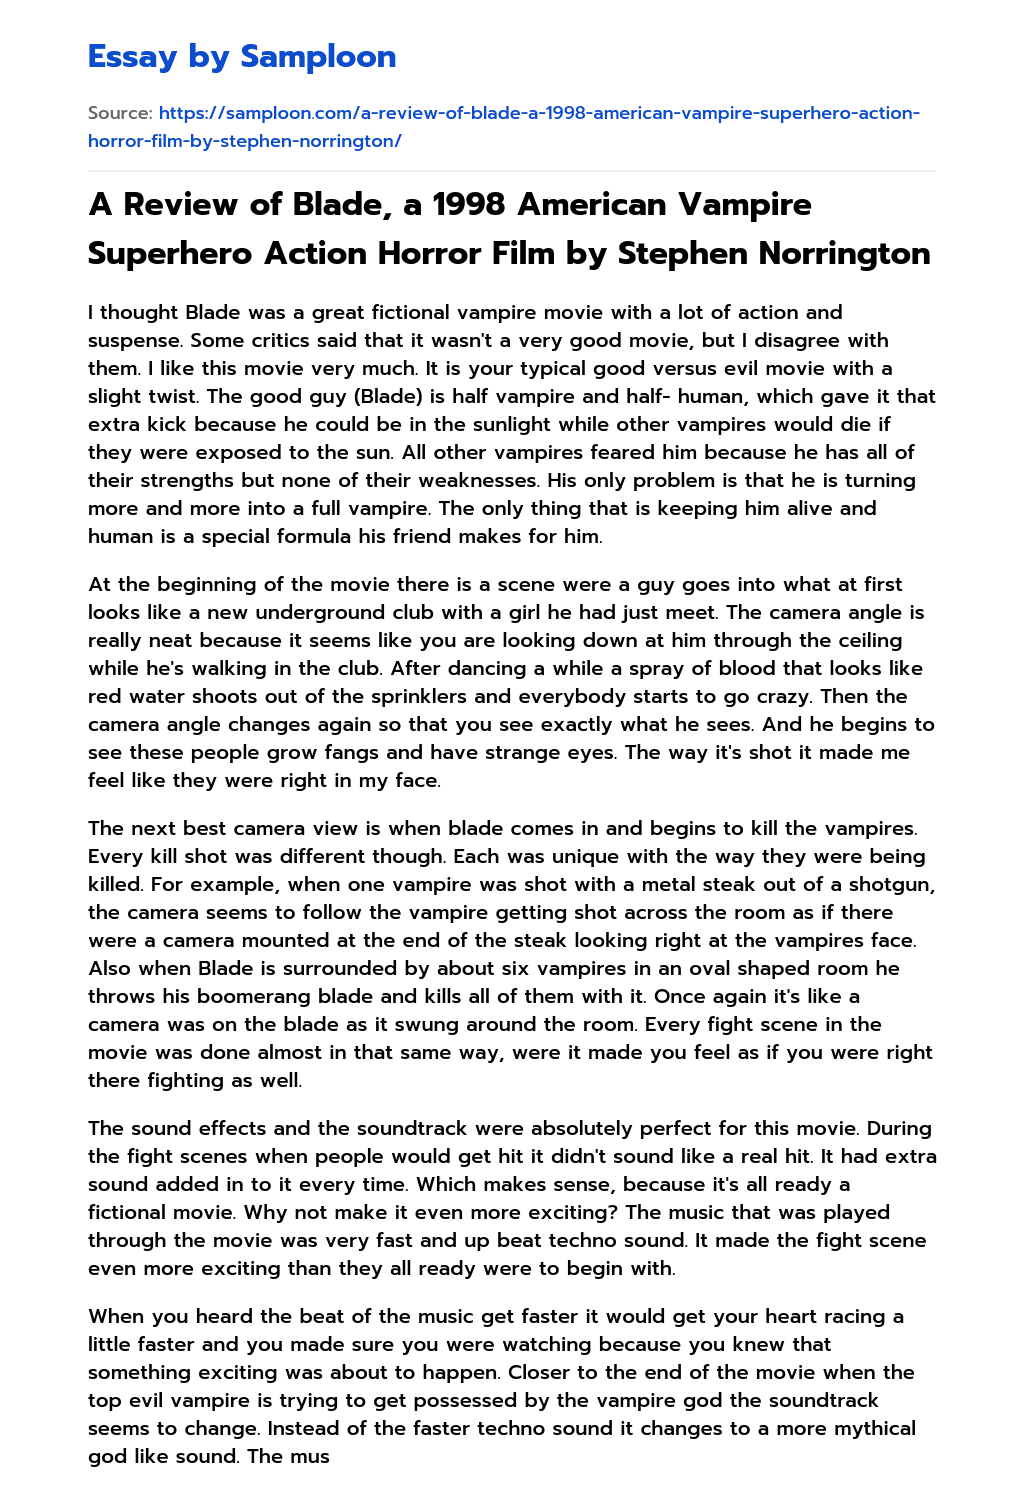 A Review of Blade, a 1998 American Vampire Superhero Action Horror Film by Stephen Norrington essay